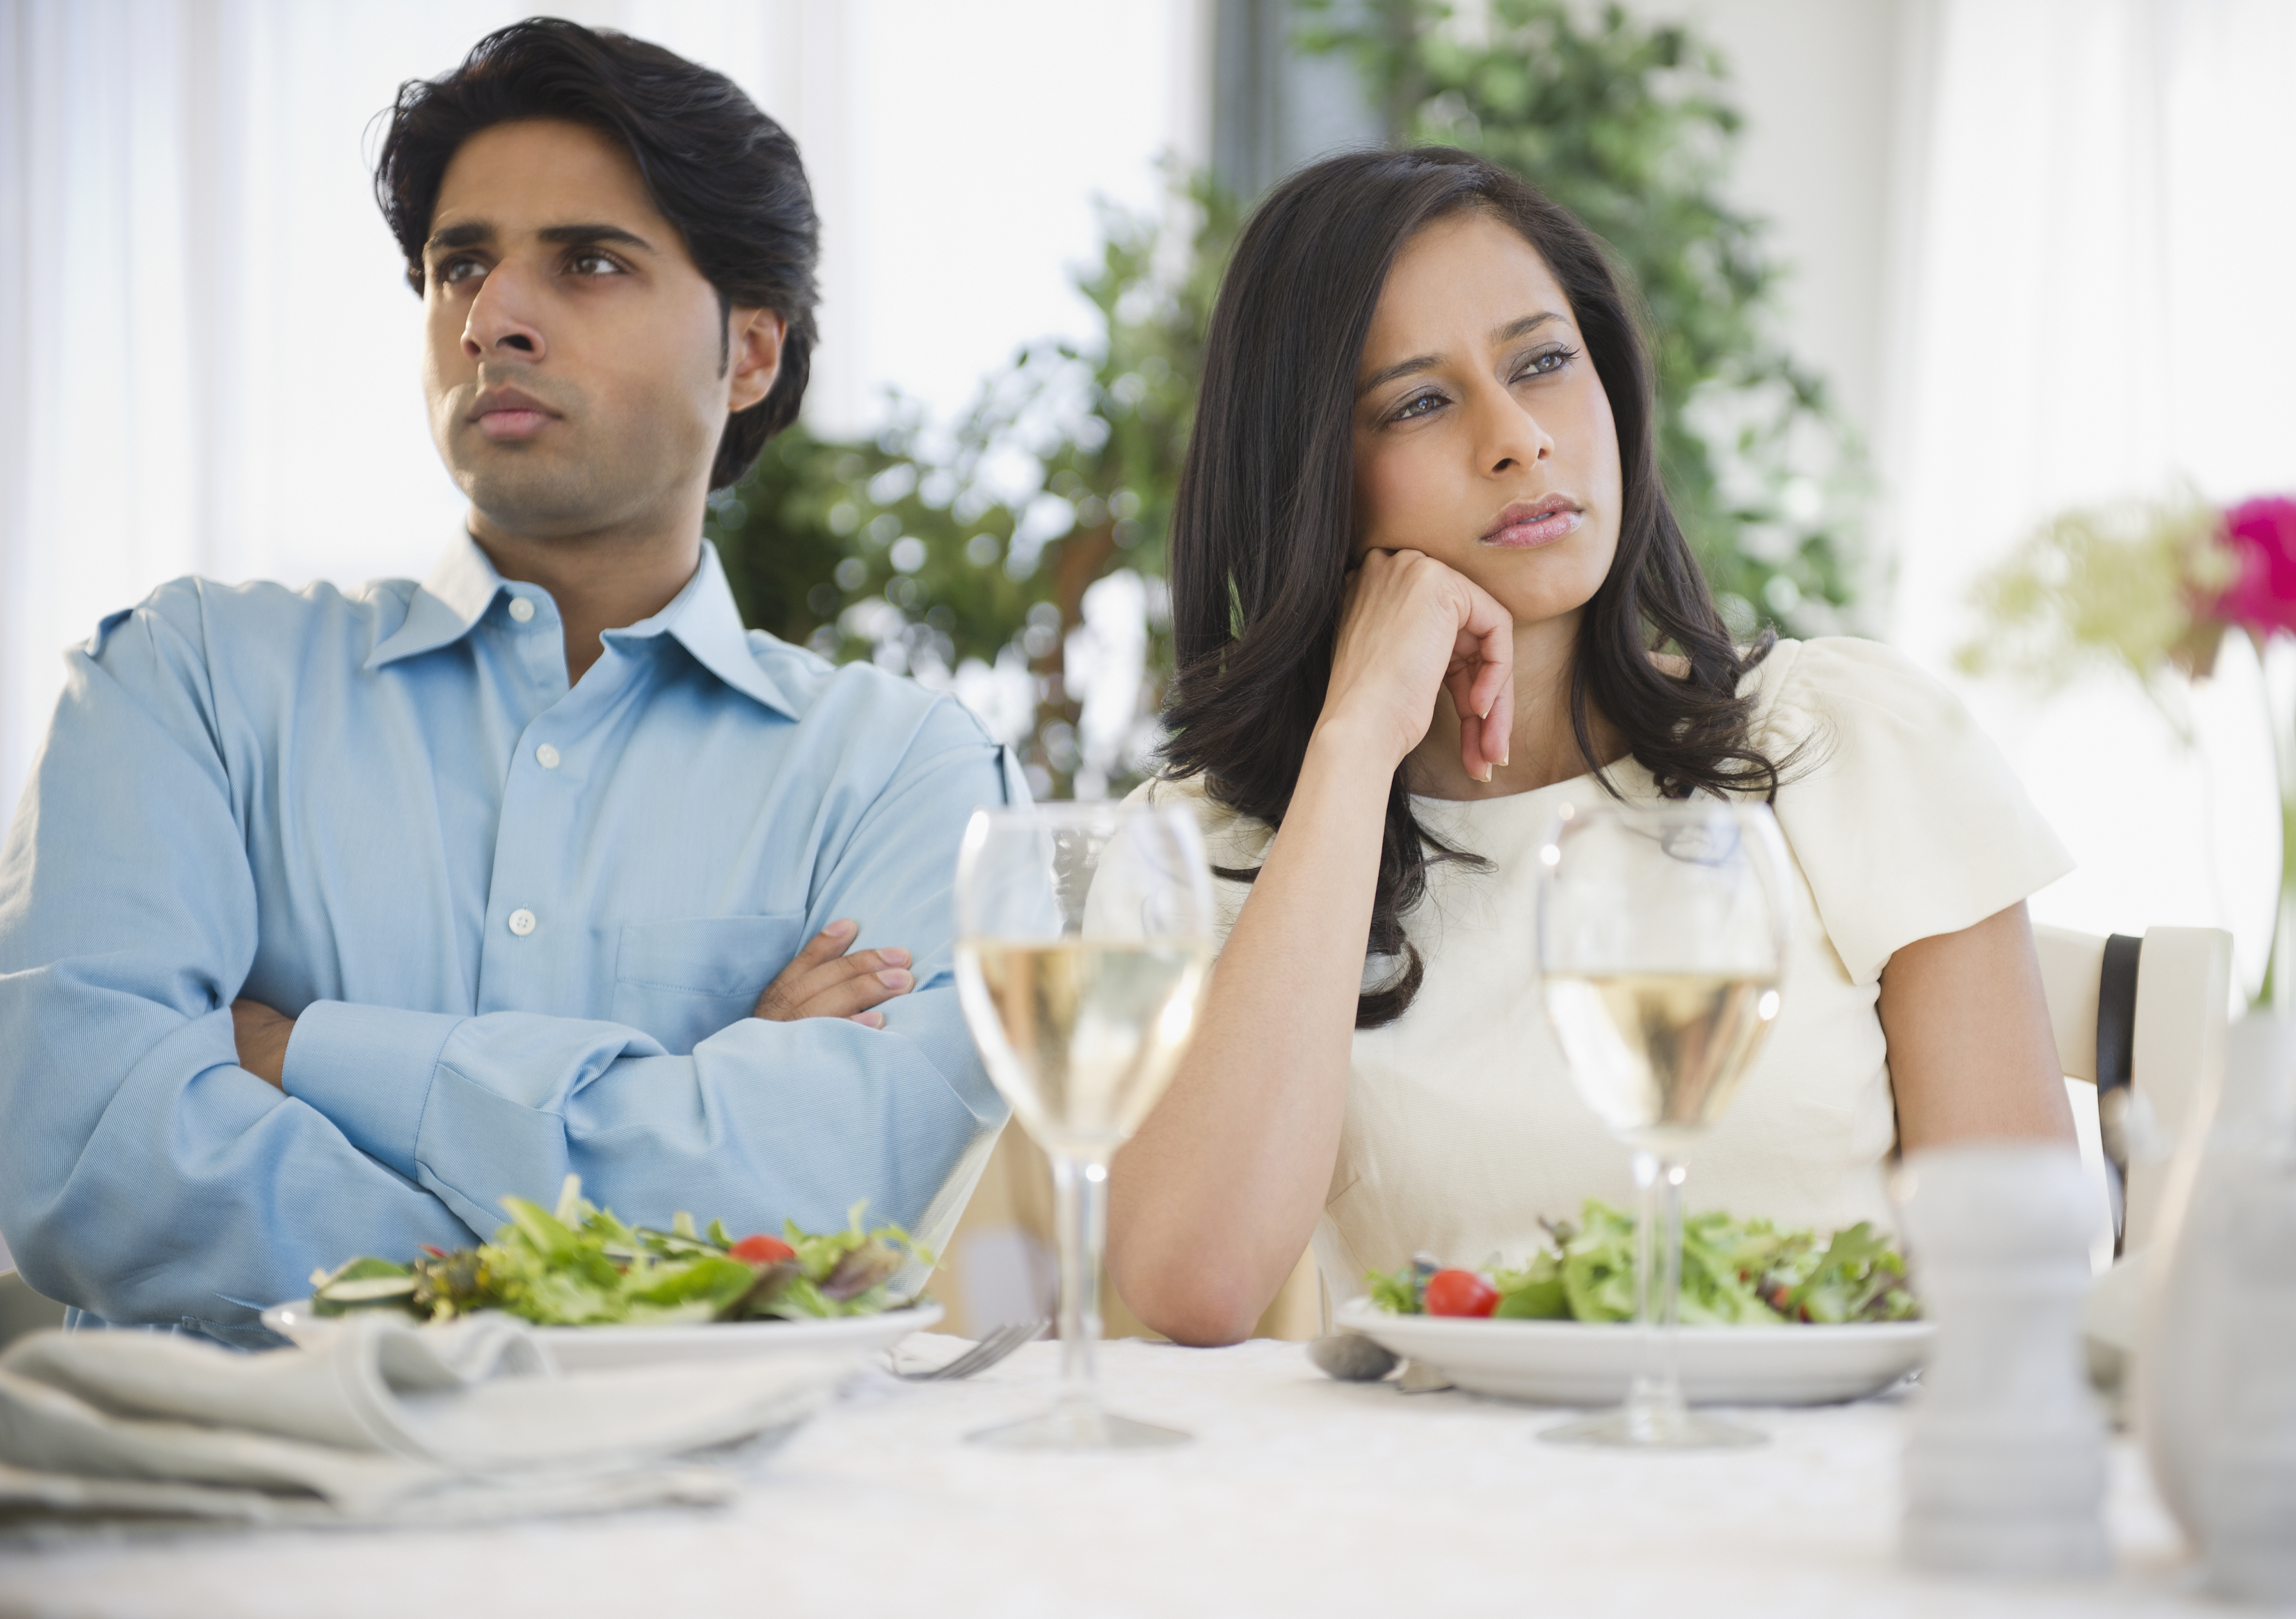 An upset couple dining together | Source: Getty Images